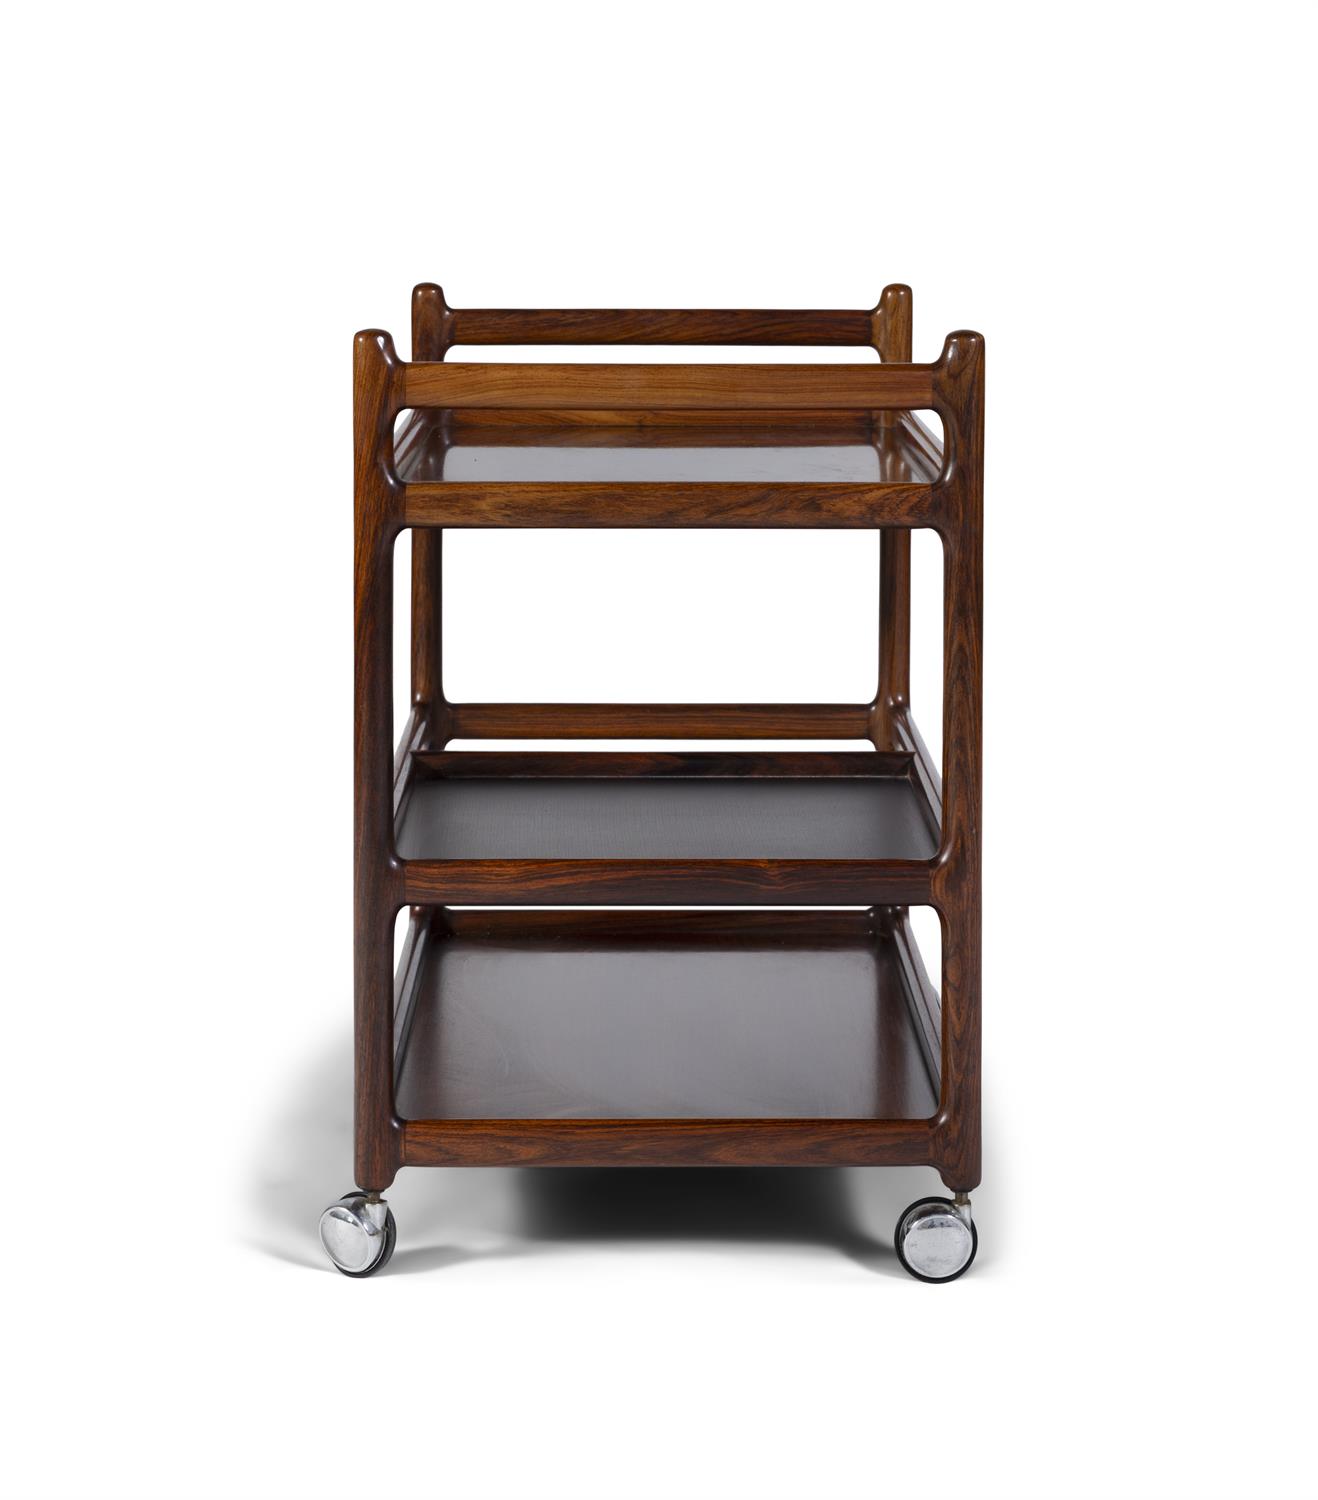 JOHANNES ANDERSEN A rosewood drinks trolley on four castors by Johannes Andersen for CFC - Image 3 of 5